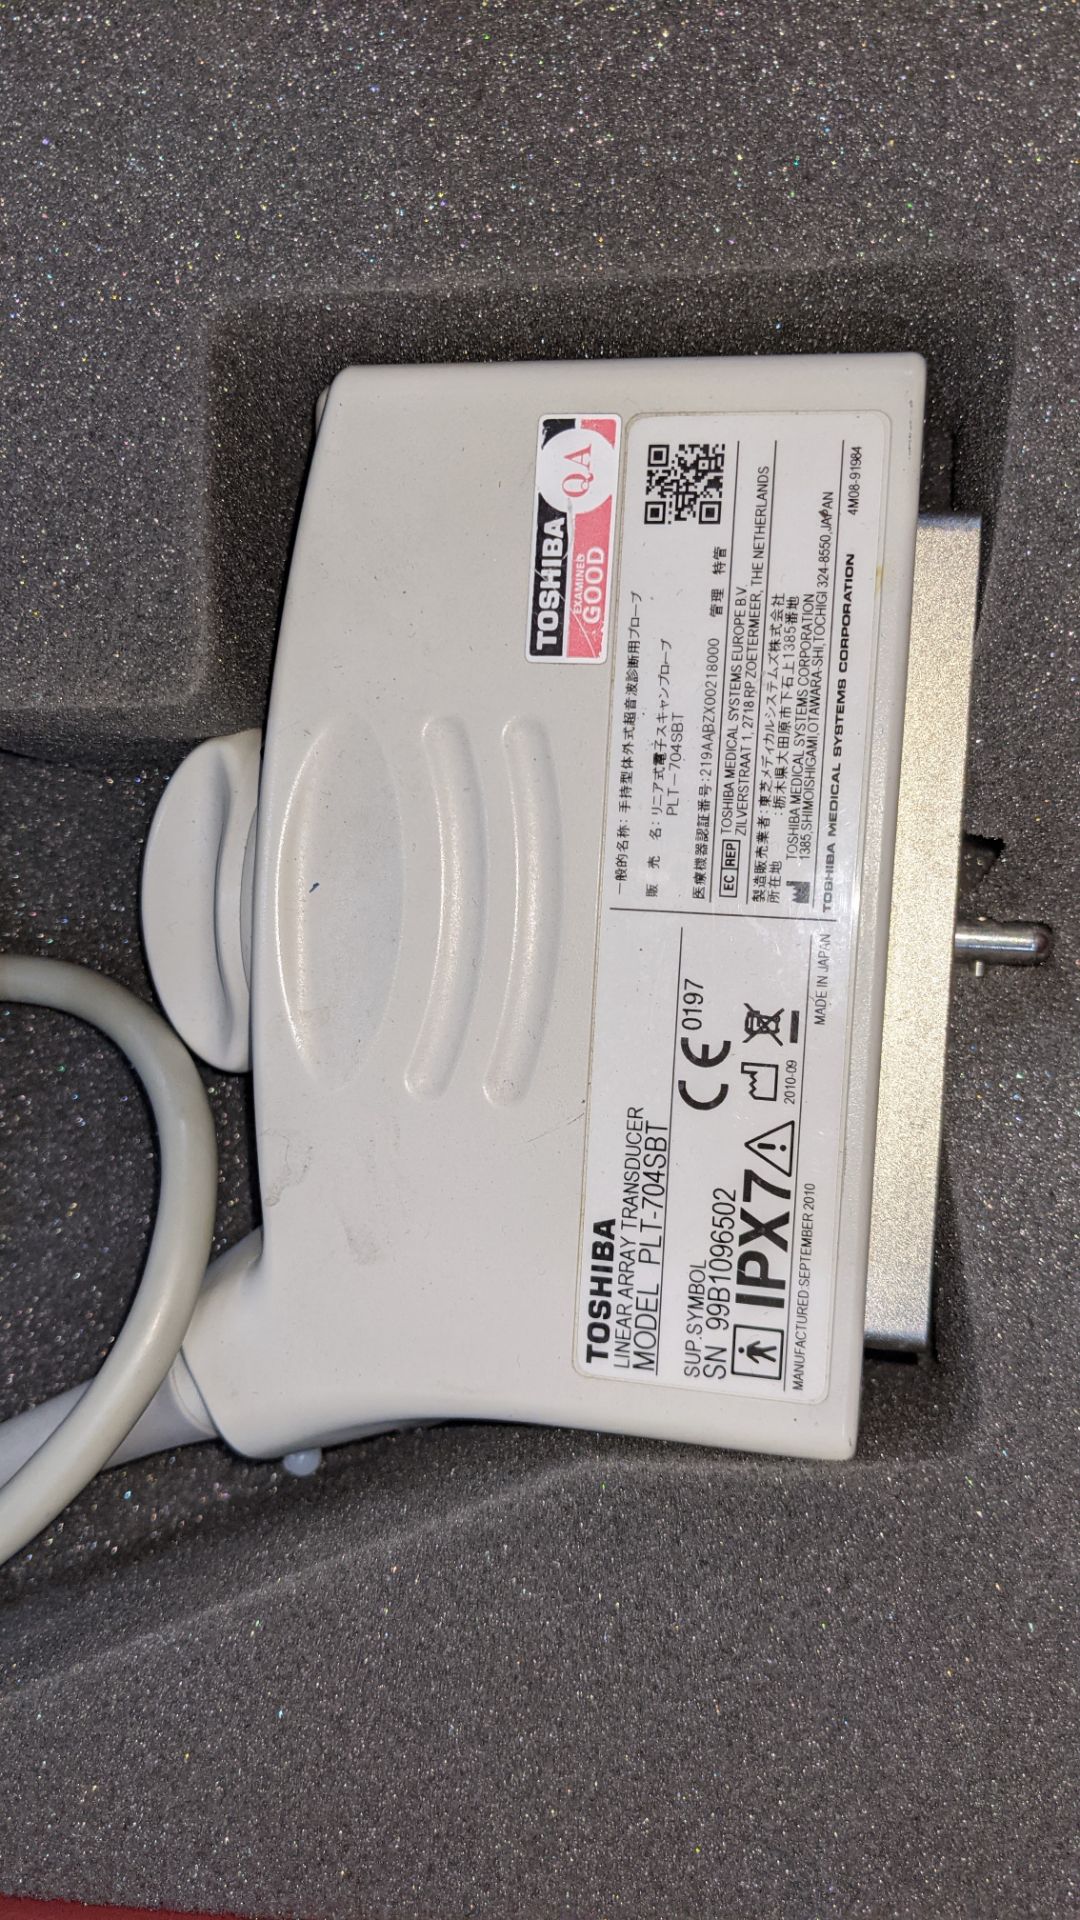 Toshiba model PLT-704 SBT linear array ultrasound transducer/probe in case - Image 3 of 6